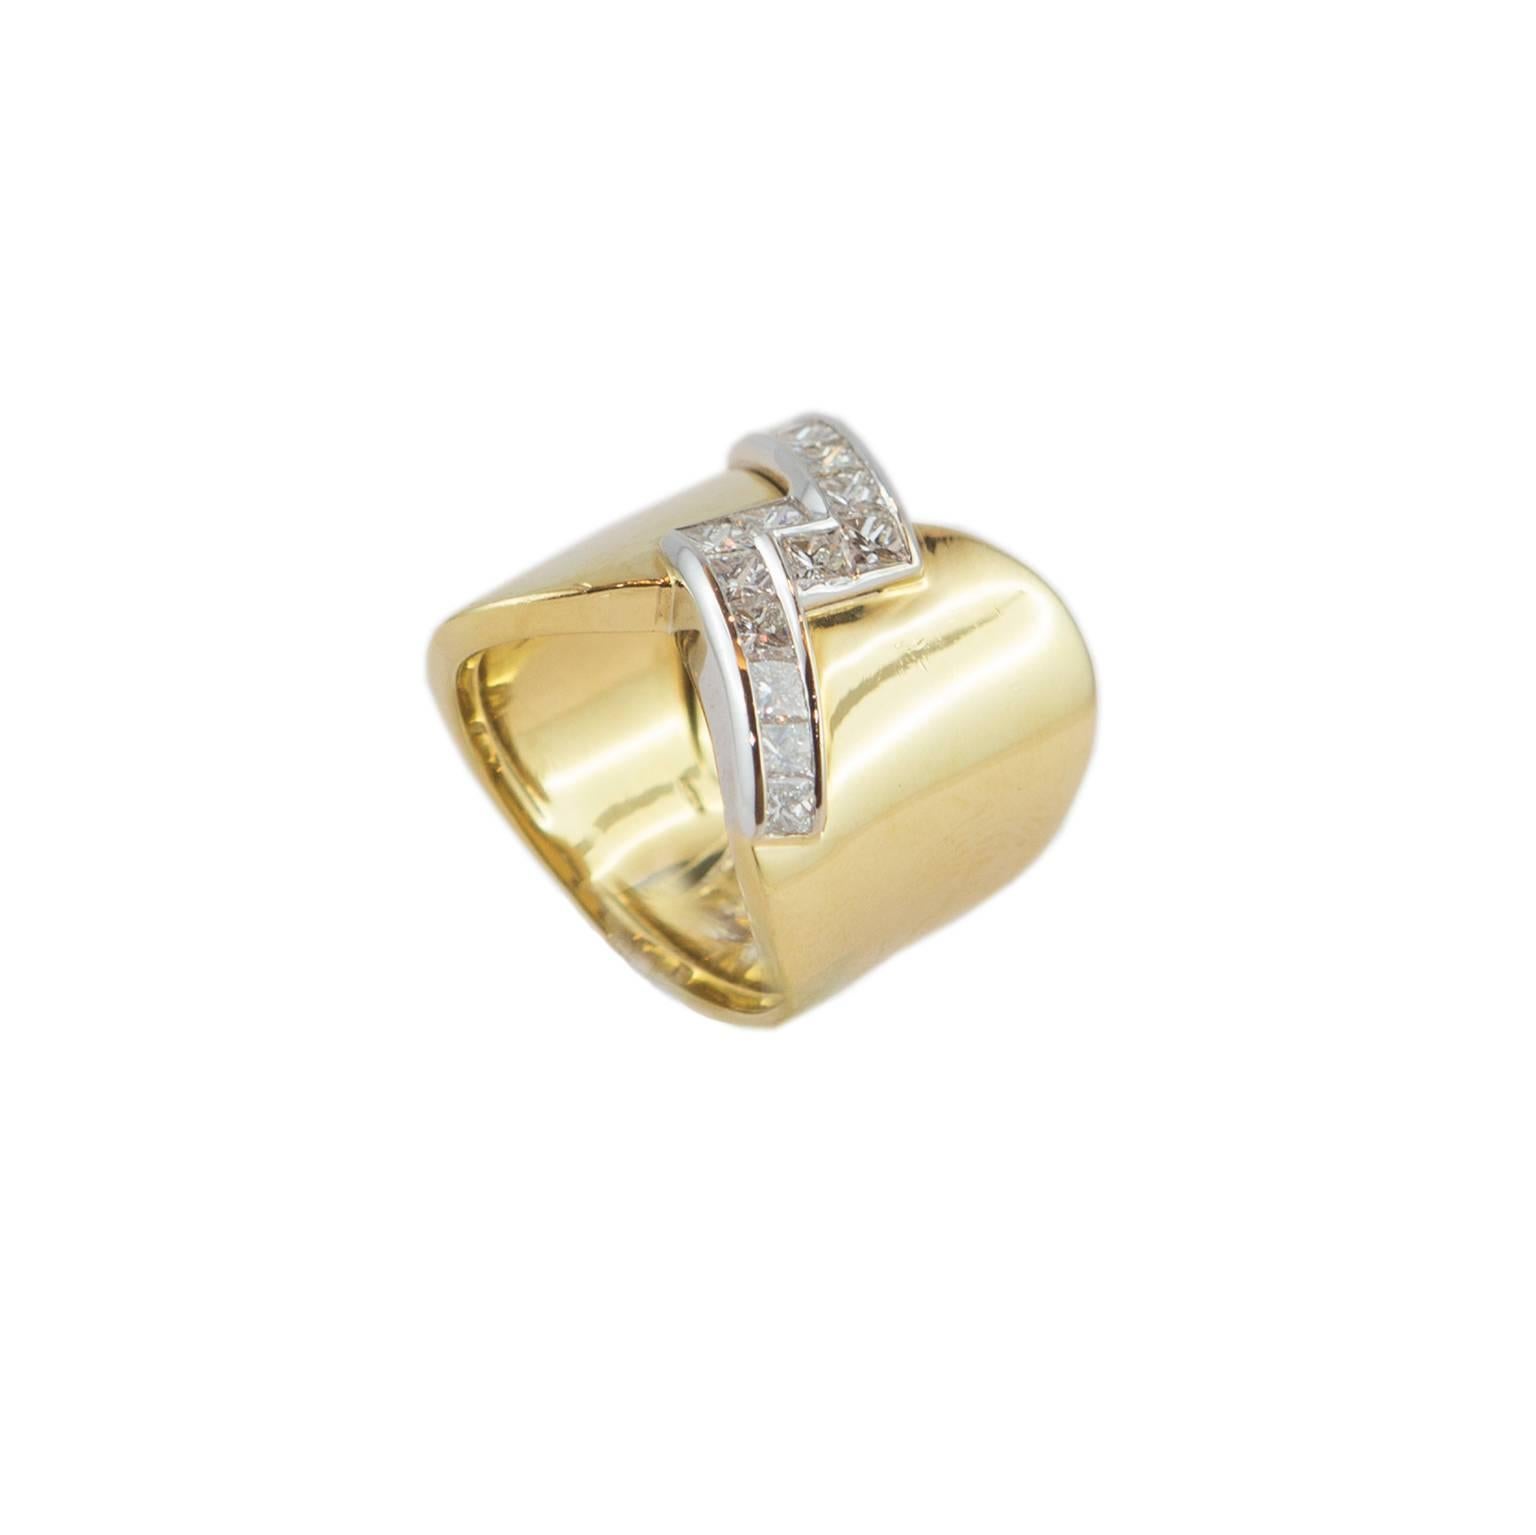   18 Karat yellow gold band with a thunder motif of carré diamonds for a total of 1.51 ct. Size: 13 EU - 7 1/2 US